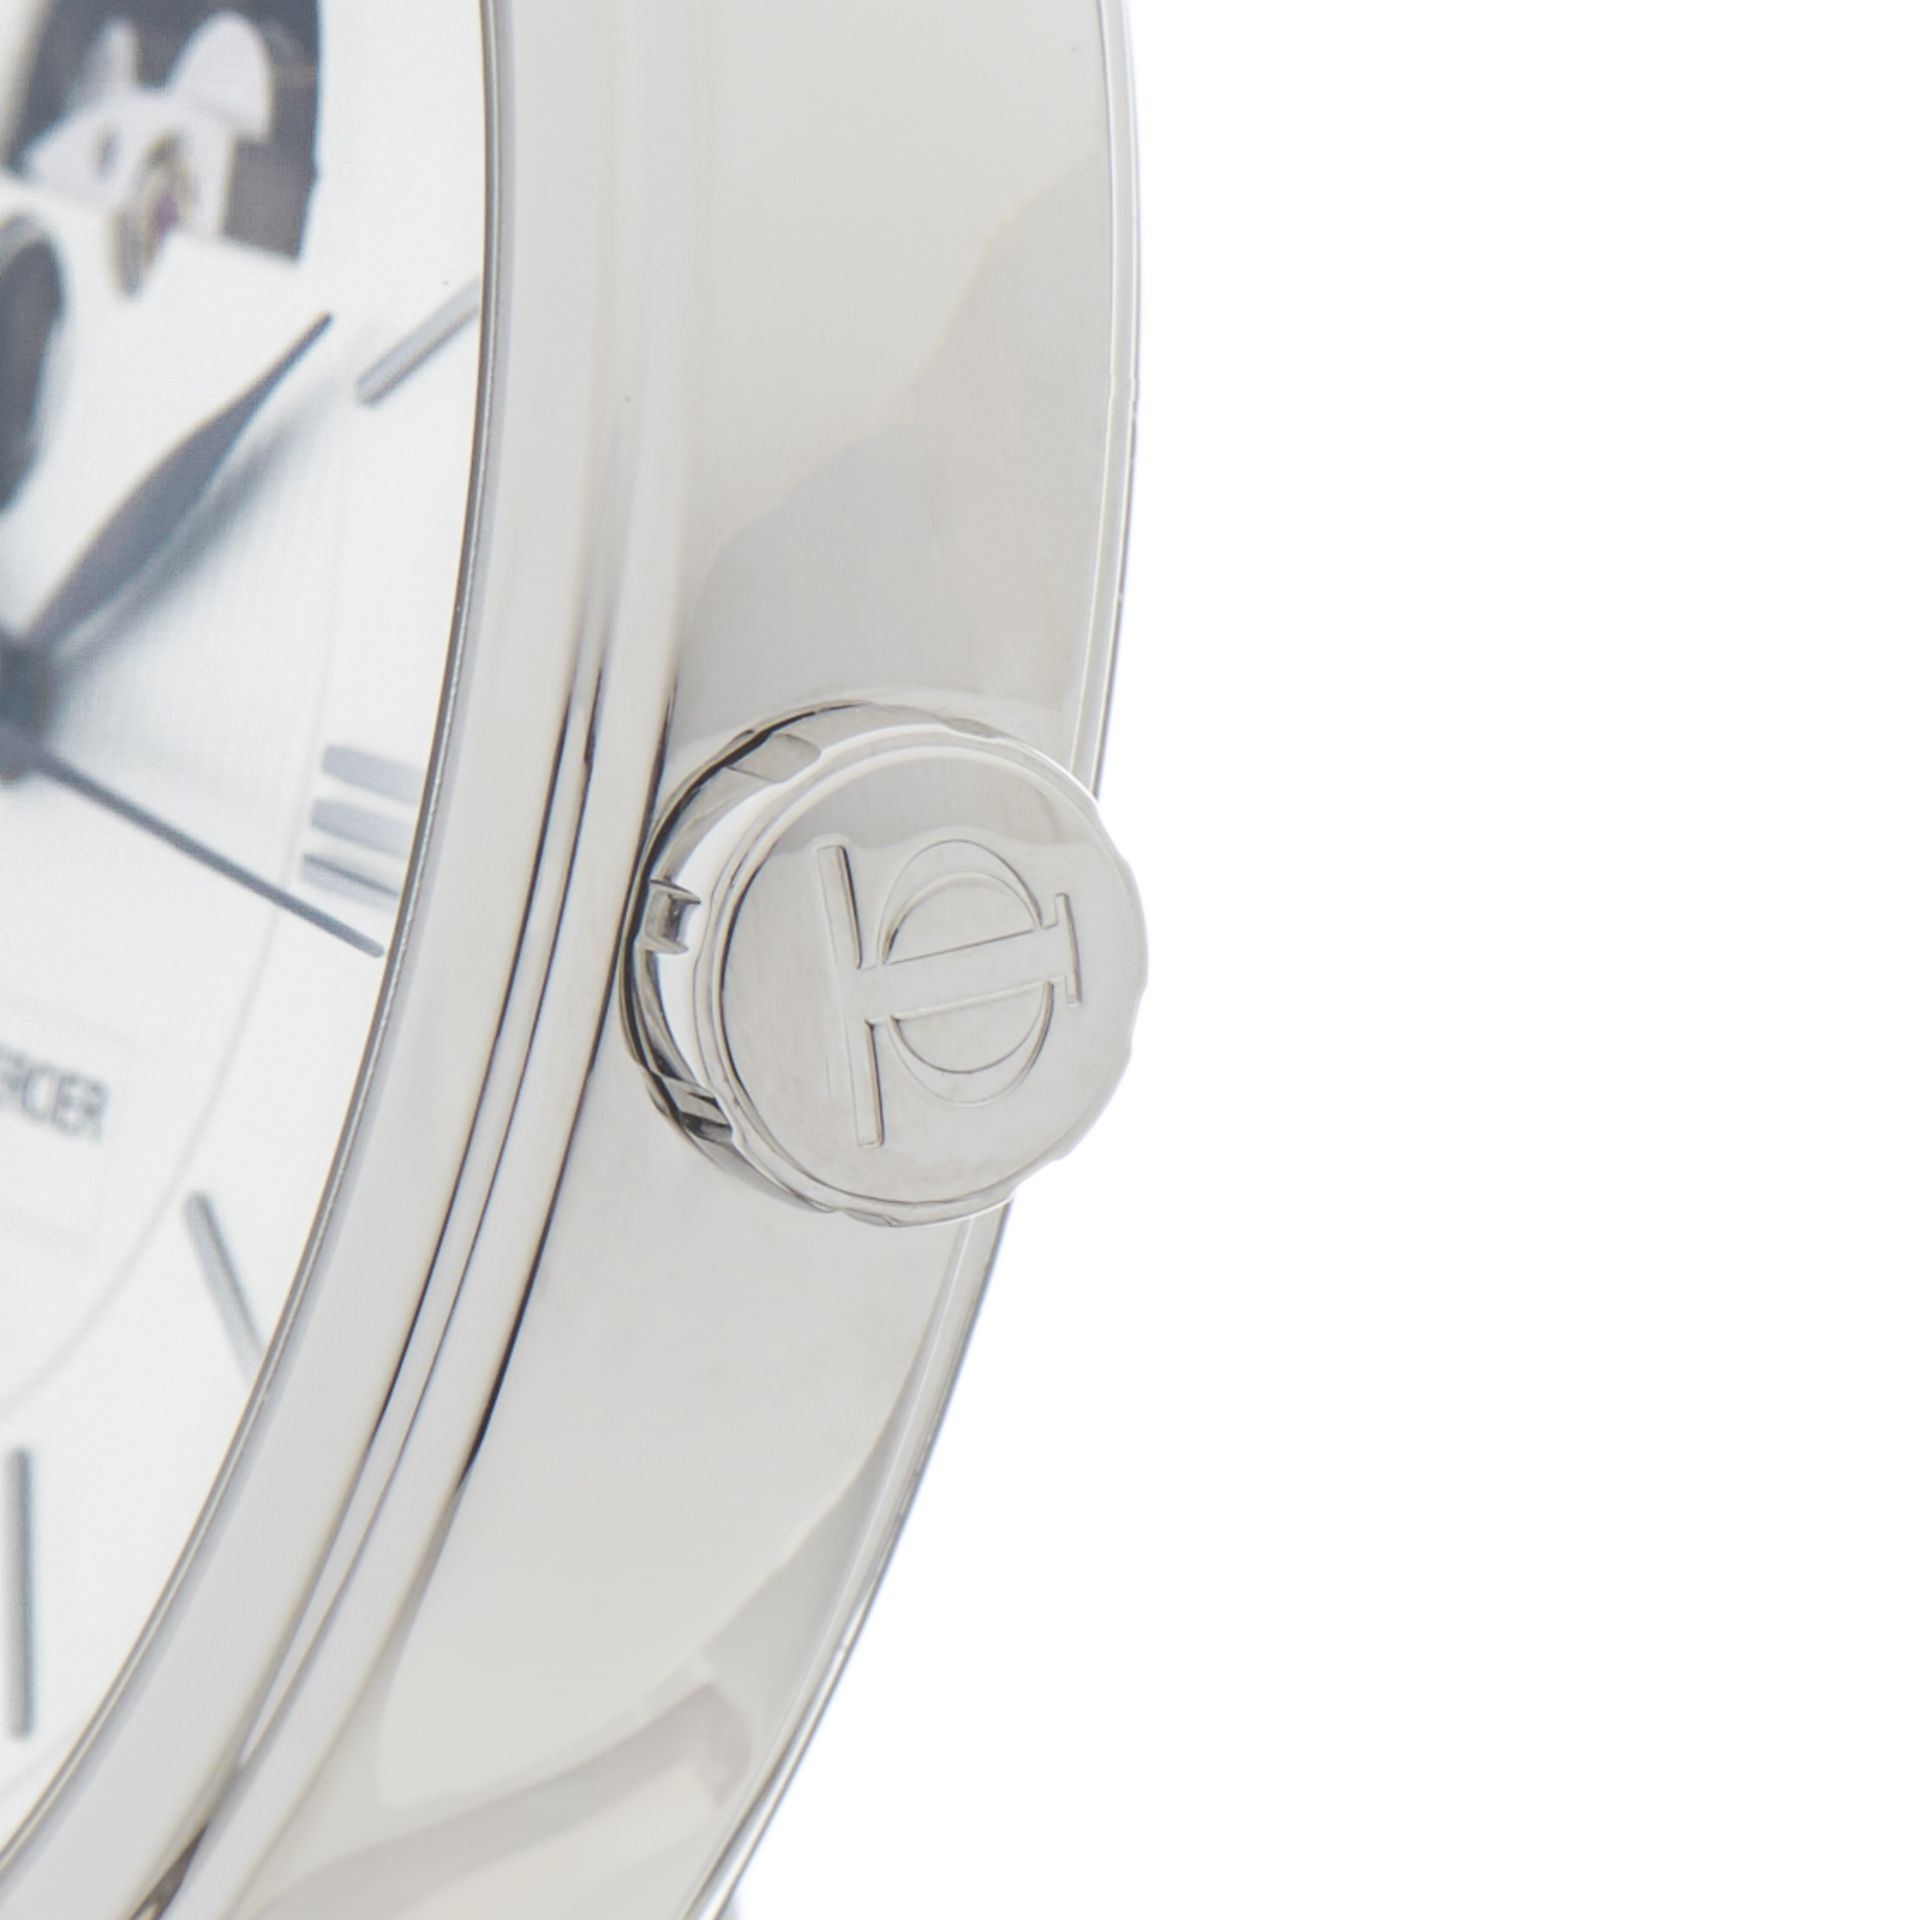 Baume & Mercier, Classima 42mm Stainless Steel M0A08833 - Image 4 of 8